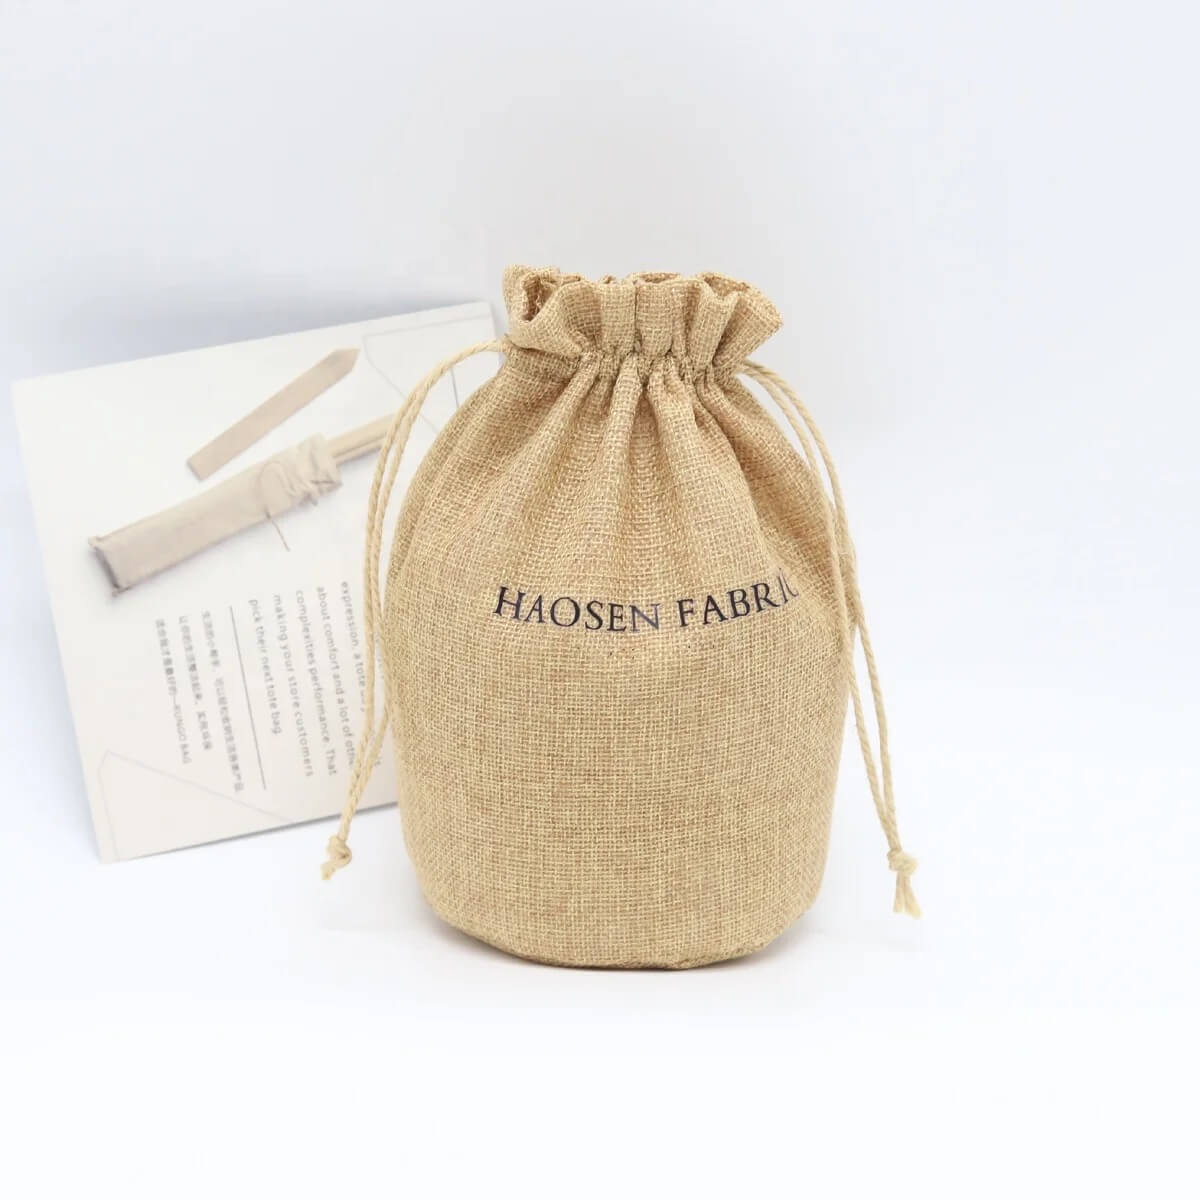 Custom Sized Gift Pouch Bags Packaging Jute Burlap Storage Bags Cotton Linen Drawstring Bags